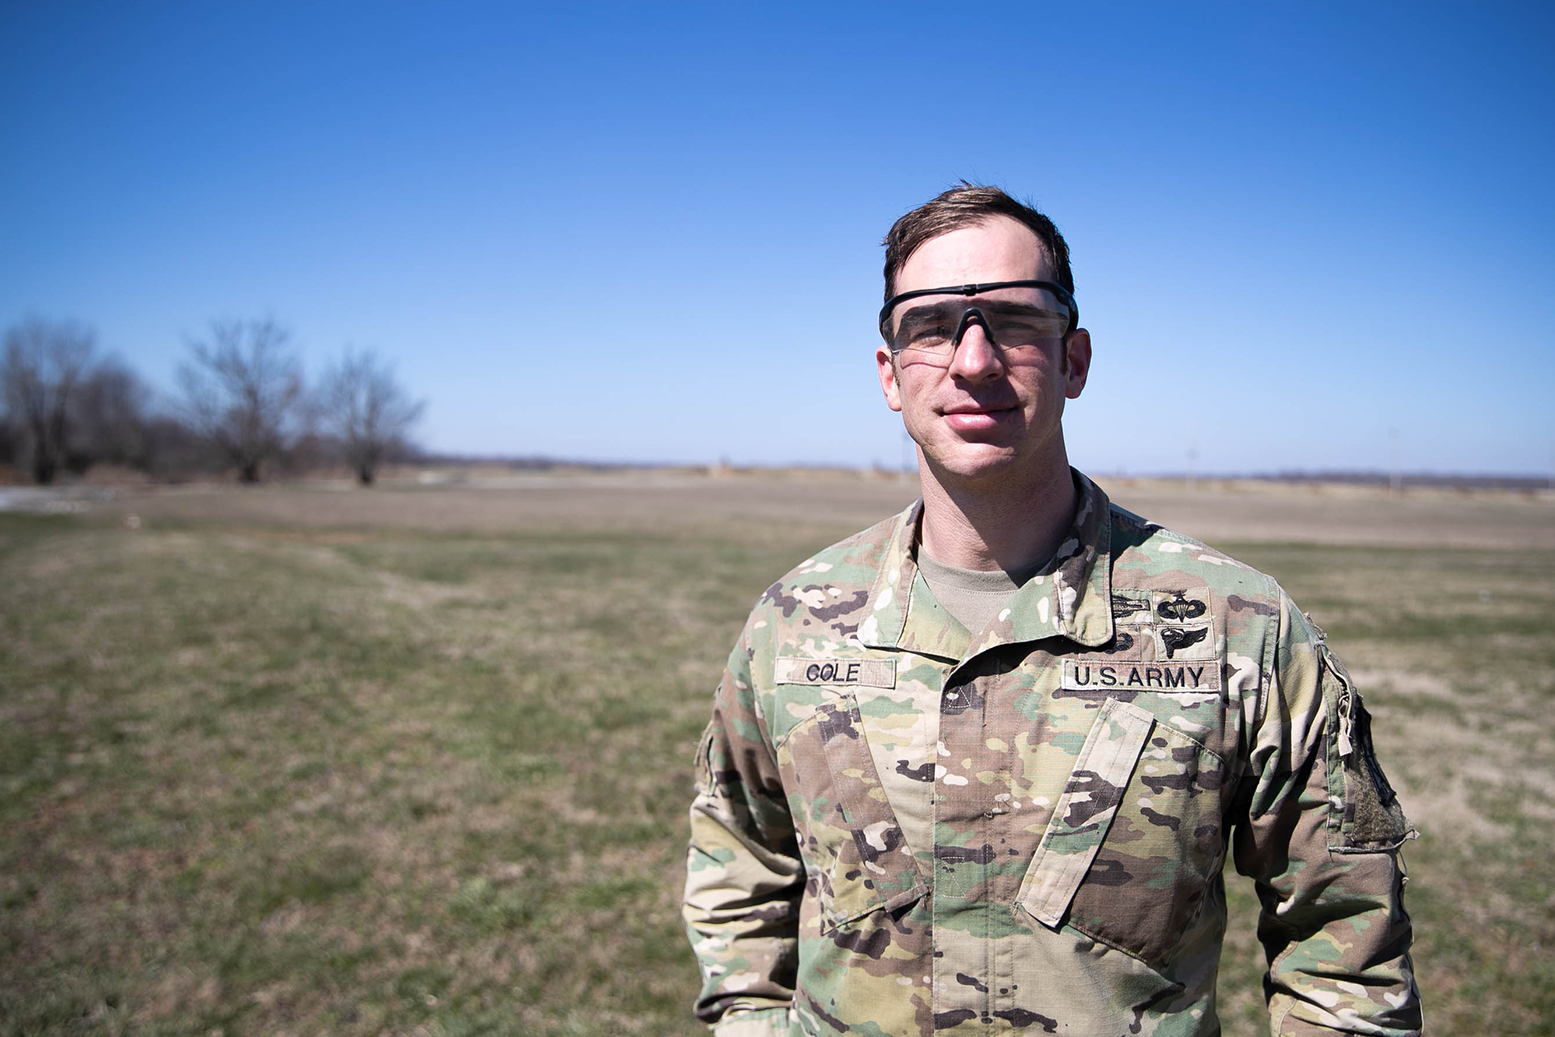 Daniel Cole poses for photo during ROTC sandhurst competition practice